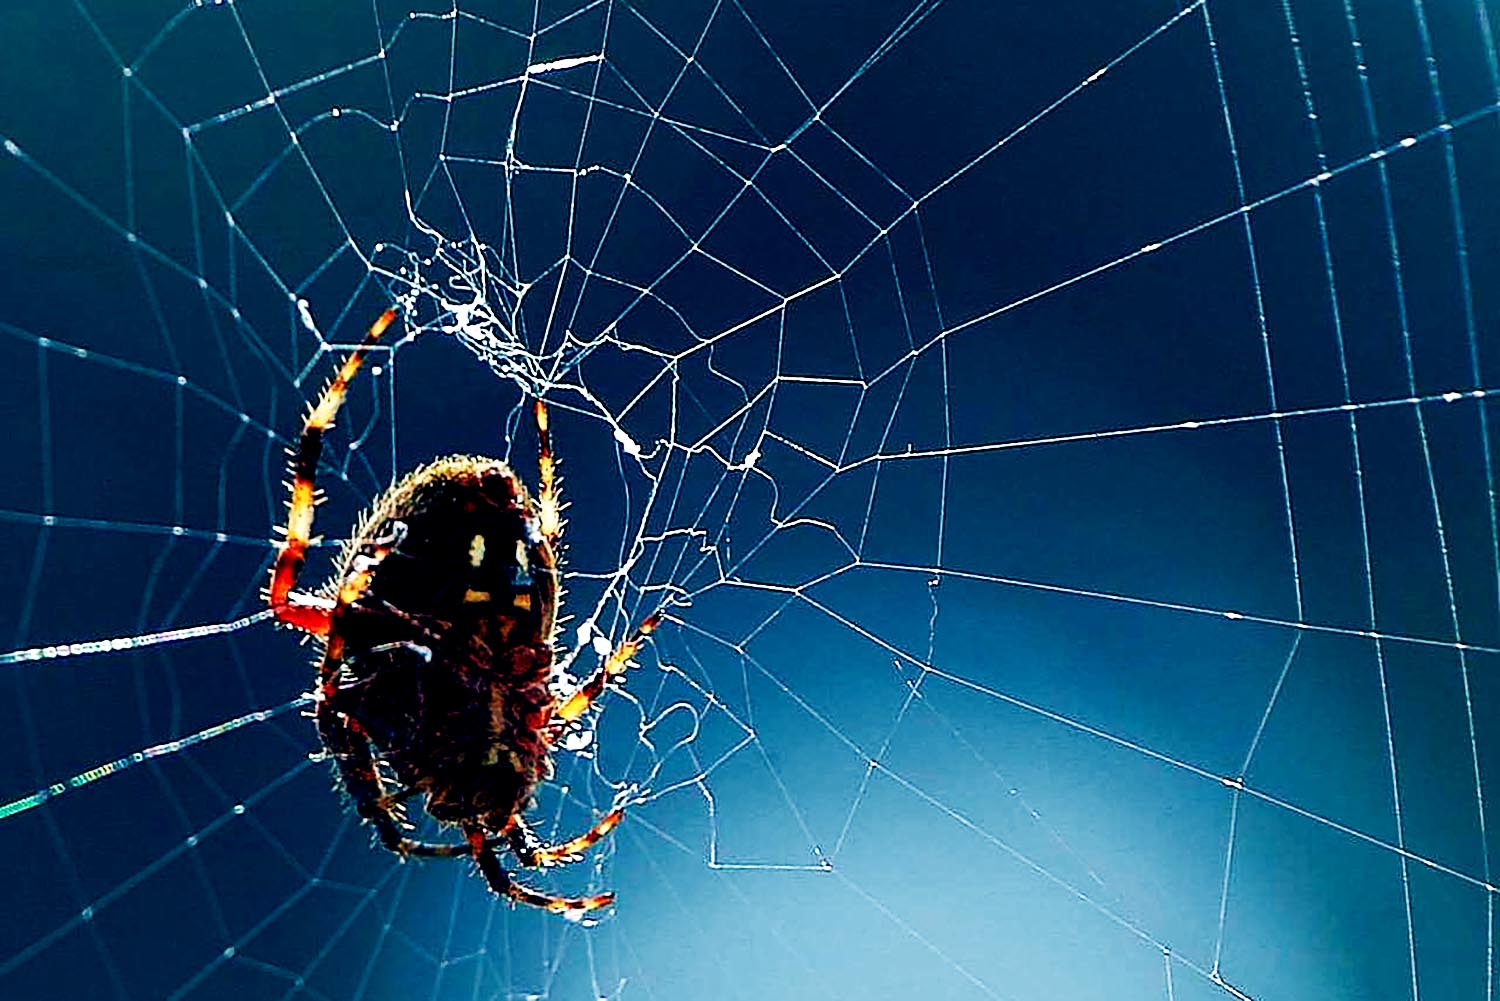 Spider Webs can trap DNA